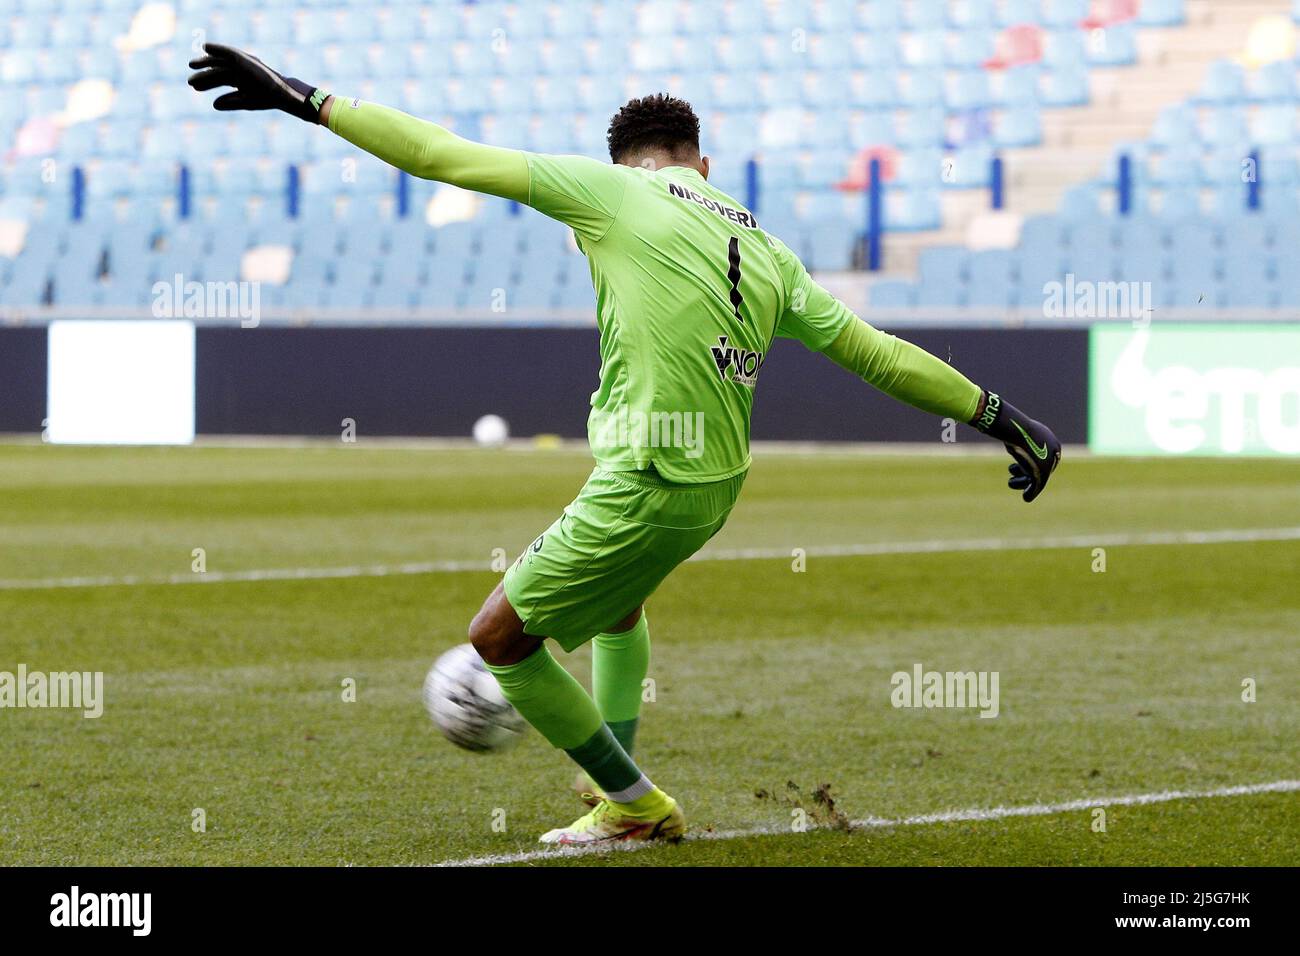 ARNHEM - Sparta Rotterdam goalkeeper Maduka Okoye prior to the Dutch Eredivisie match between Vitesse and Sparta Rotterdam at the Gelredome on April 19, 2022 in Arnhem, Netherlands. Vitesse - Sparta was suspended in injury time on March 4 after misconduct by the home crowd. ANP JEROEN PUTMANS Stock Photo